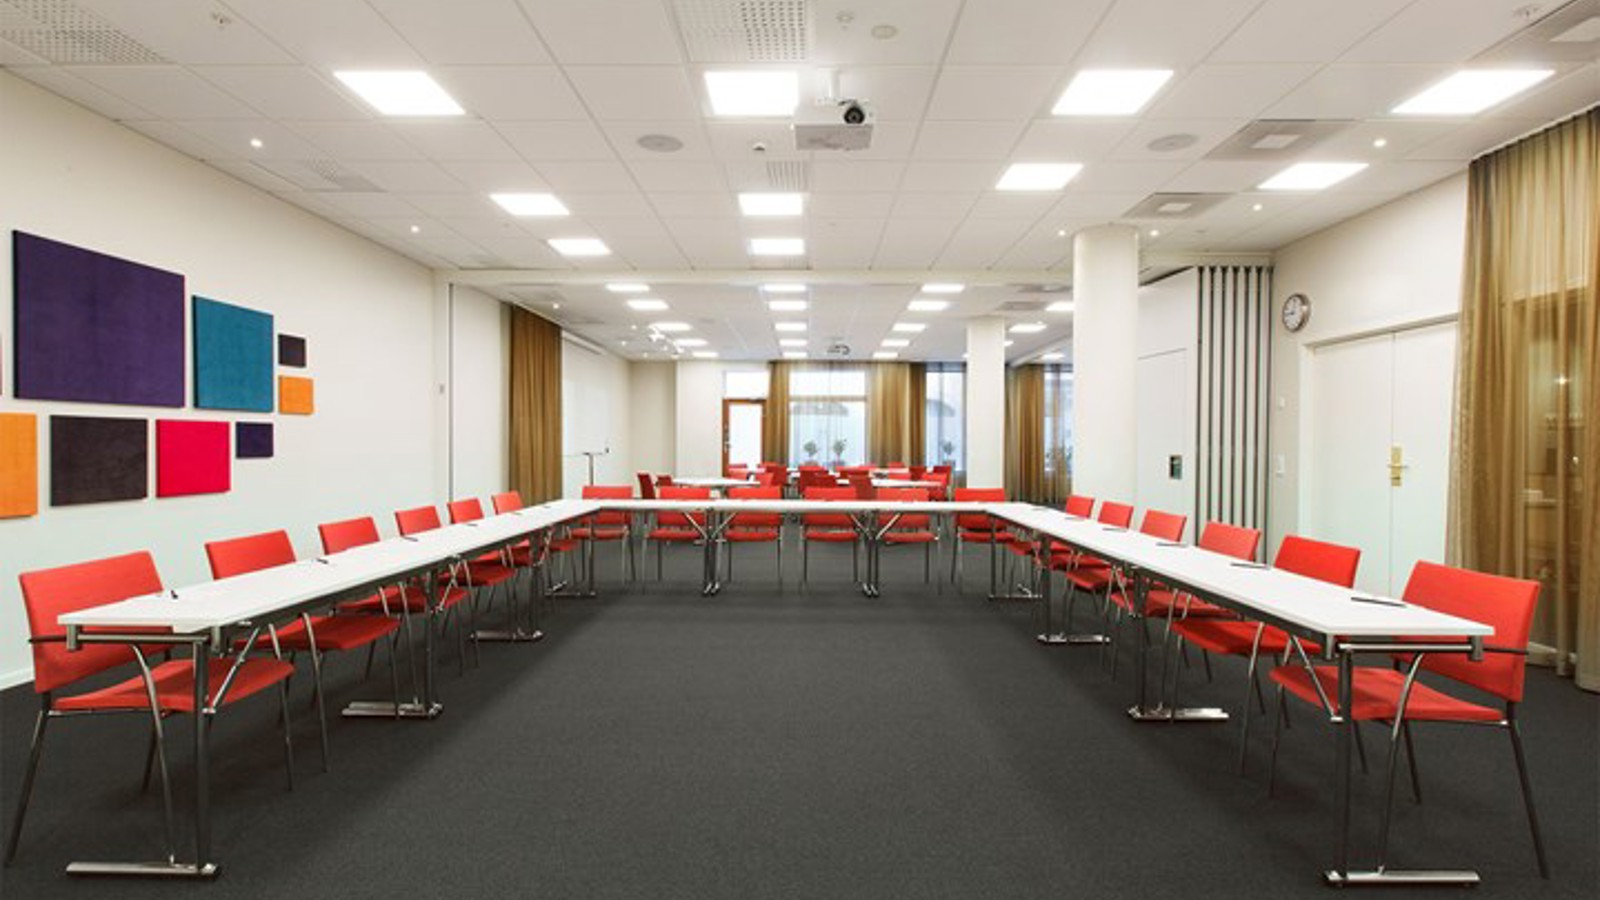 Conference room with u-shaped seating, black floor, white table, red chairs